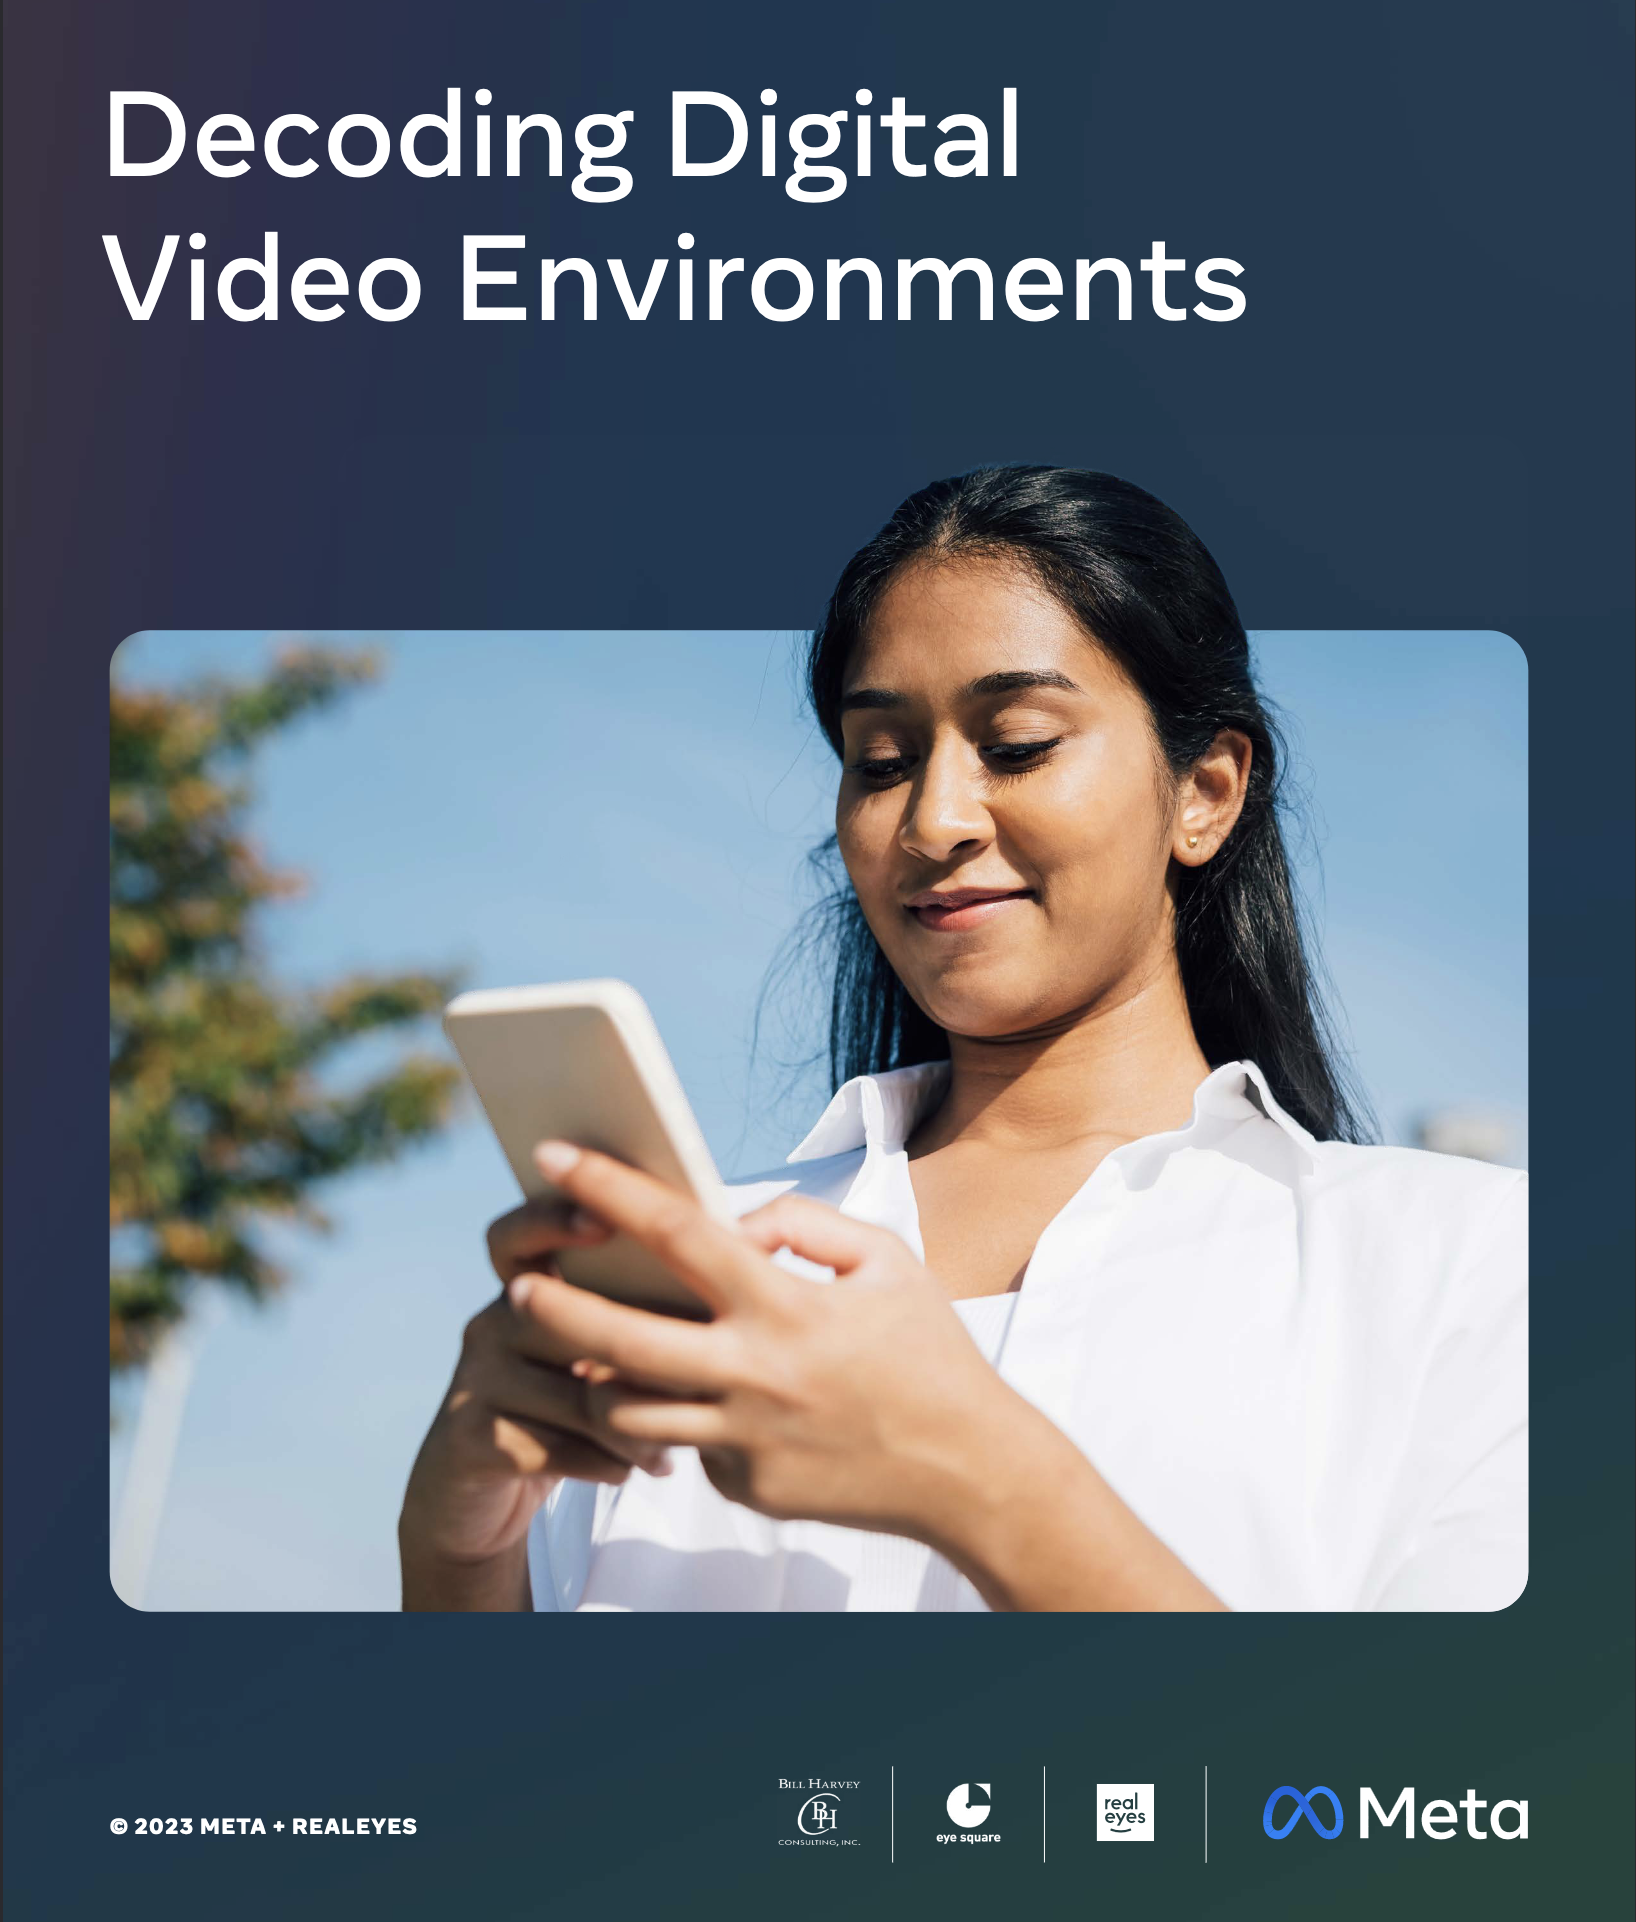 The Decoding Digital Video Environments white paper cover with a photo of a girl looking at her phone along with the eye square, Meta, Realeyes, and Bill Harvey logos